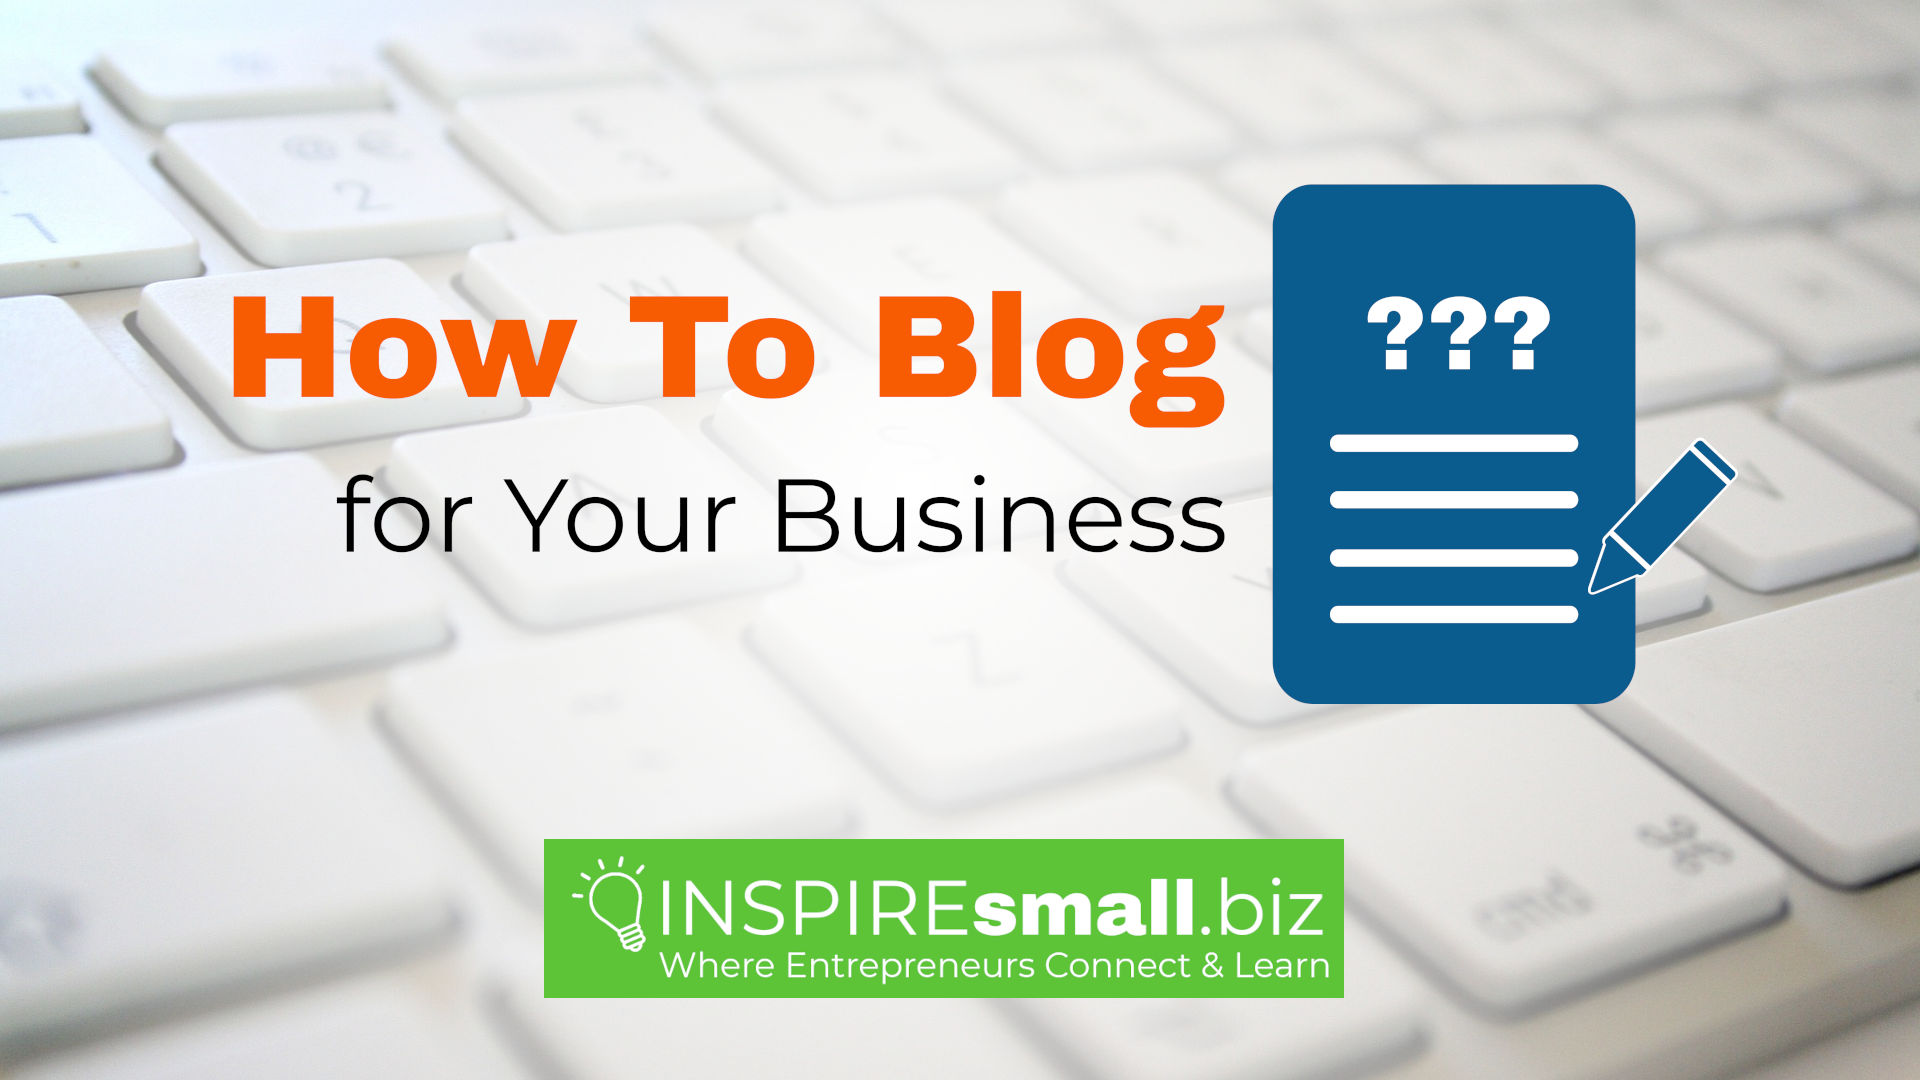 How to Blog for Your Business